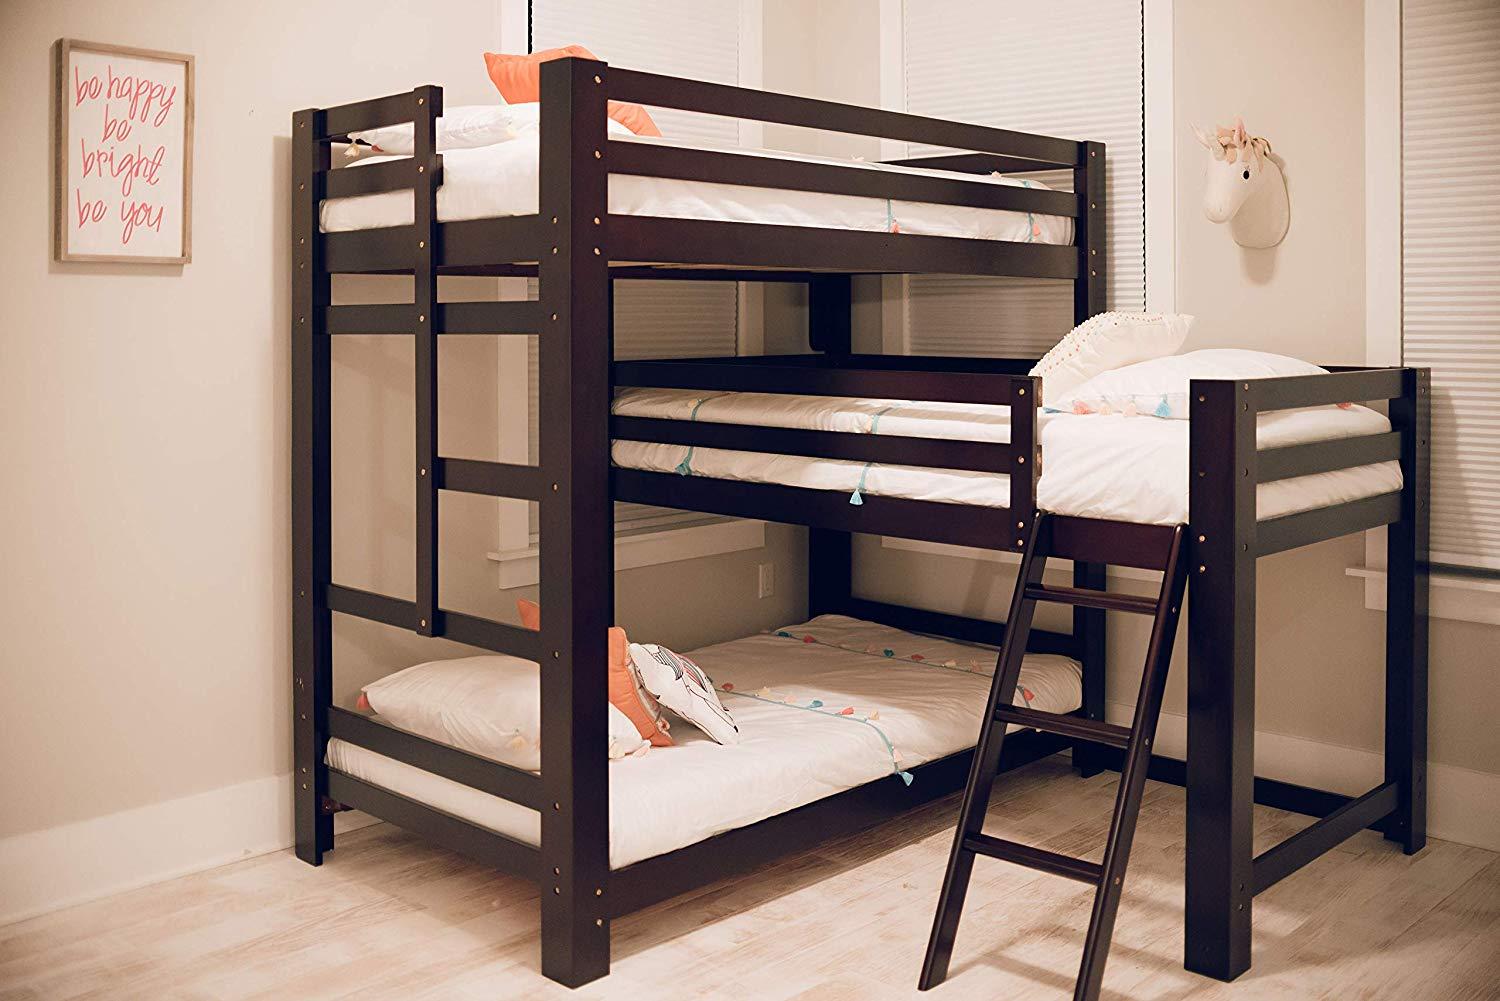 Basic L-shaped triple bunk from Amazon